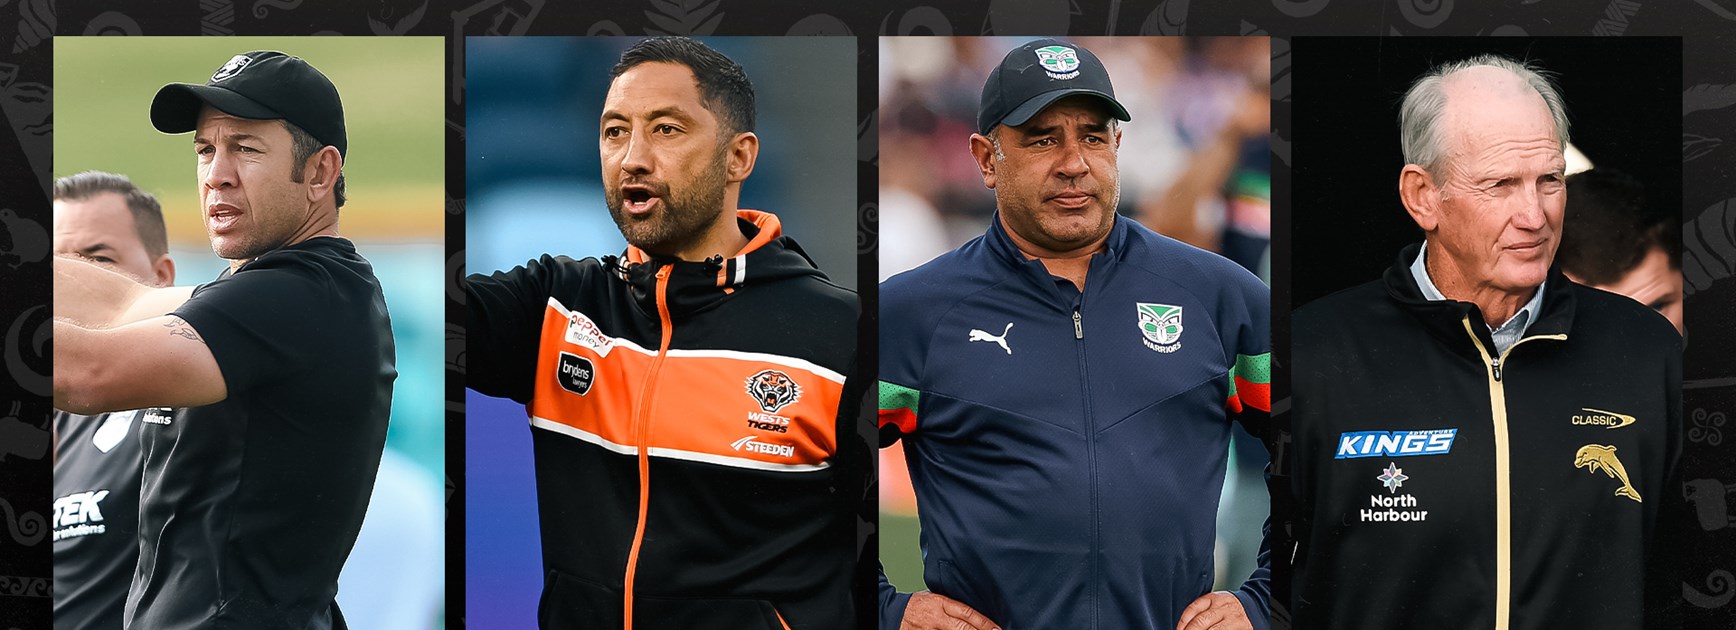 Candidate credentials: Who could be the next Kiwis coach?